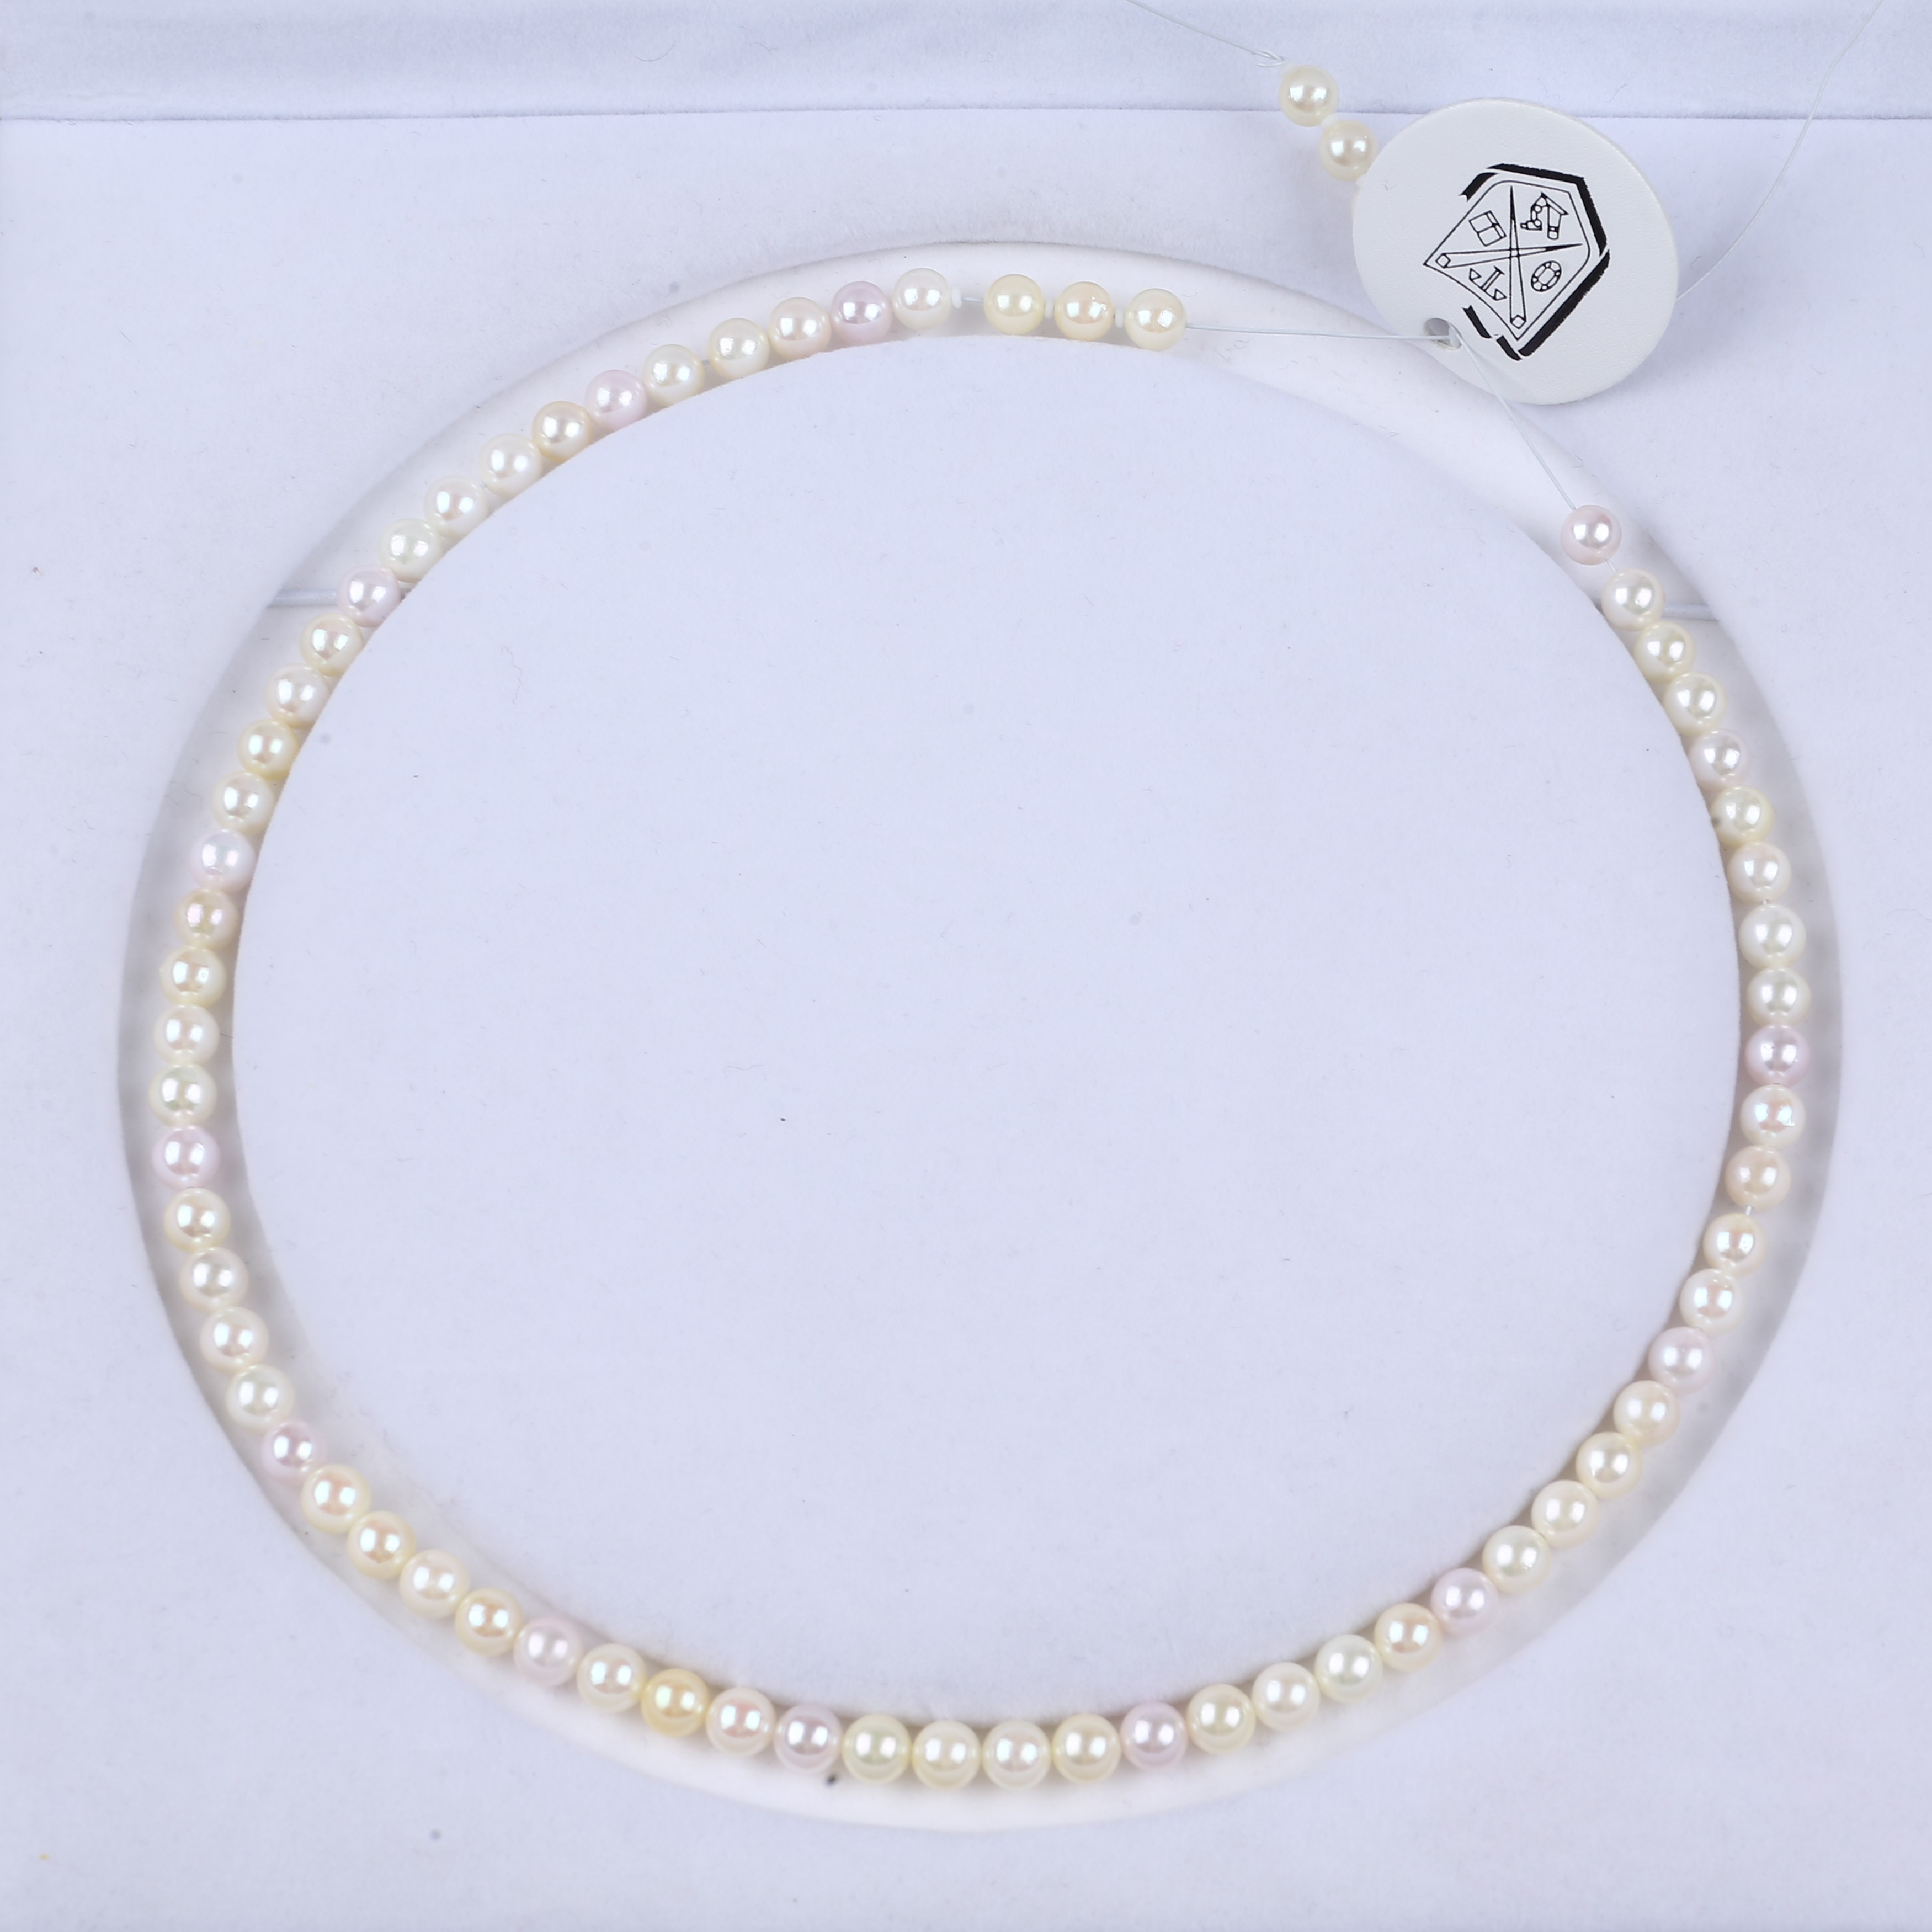 5.5-6mm Natural Akoya Pearl Strand for necklace Making